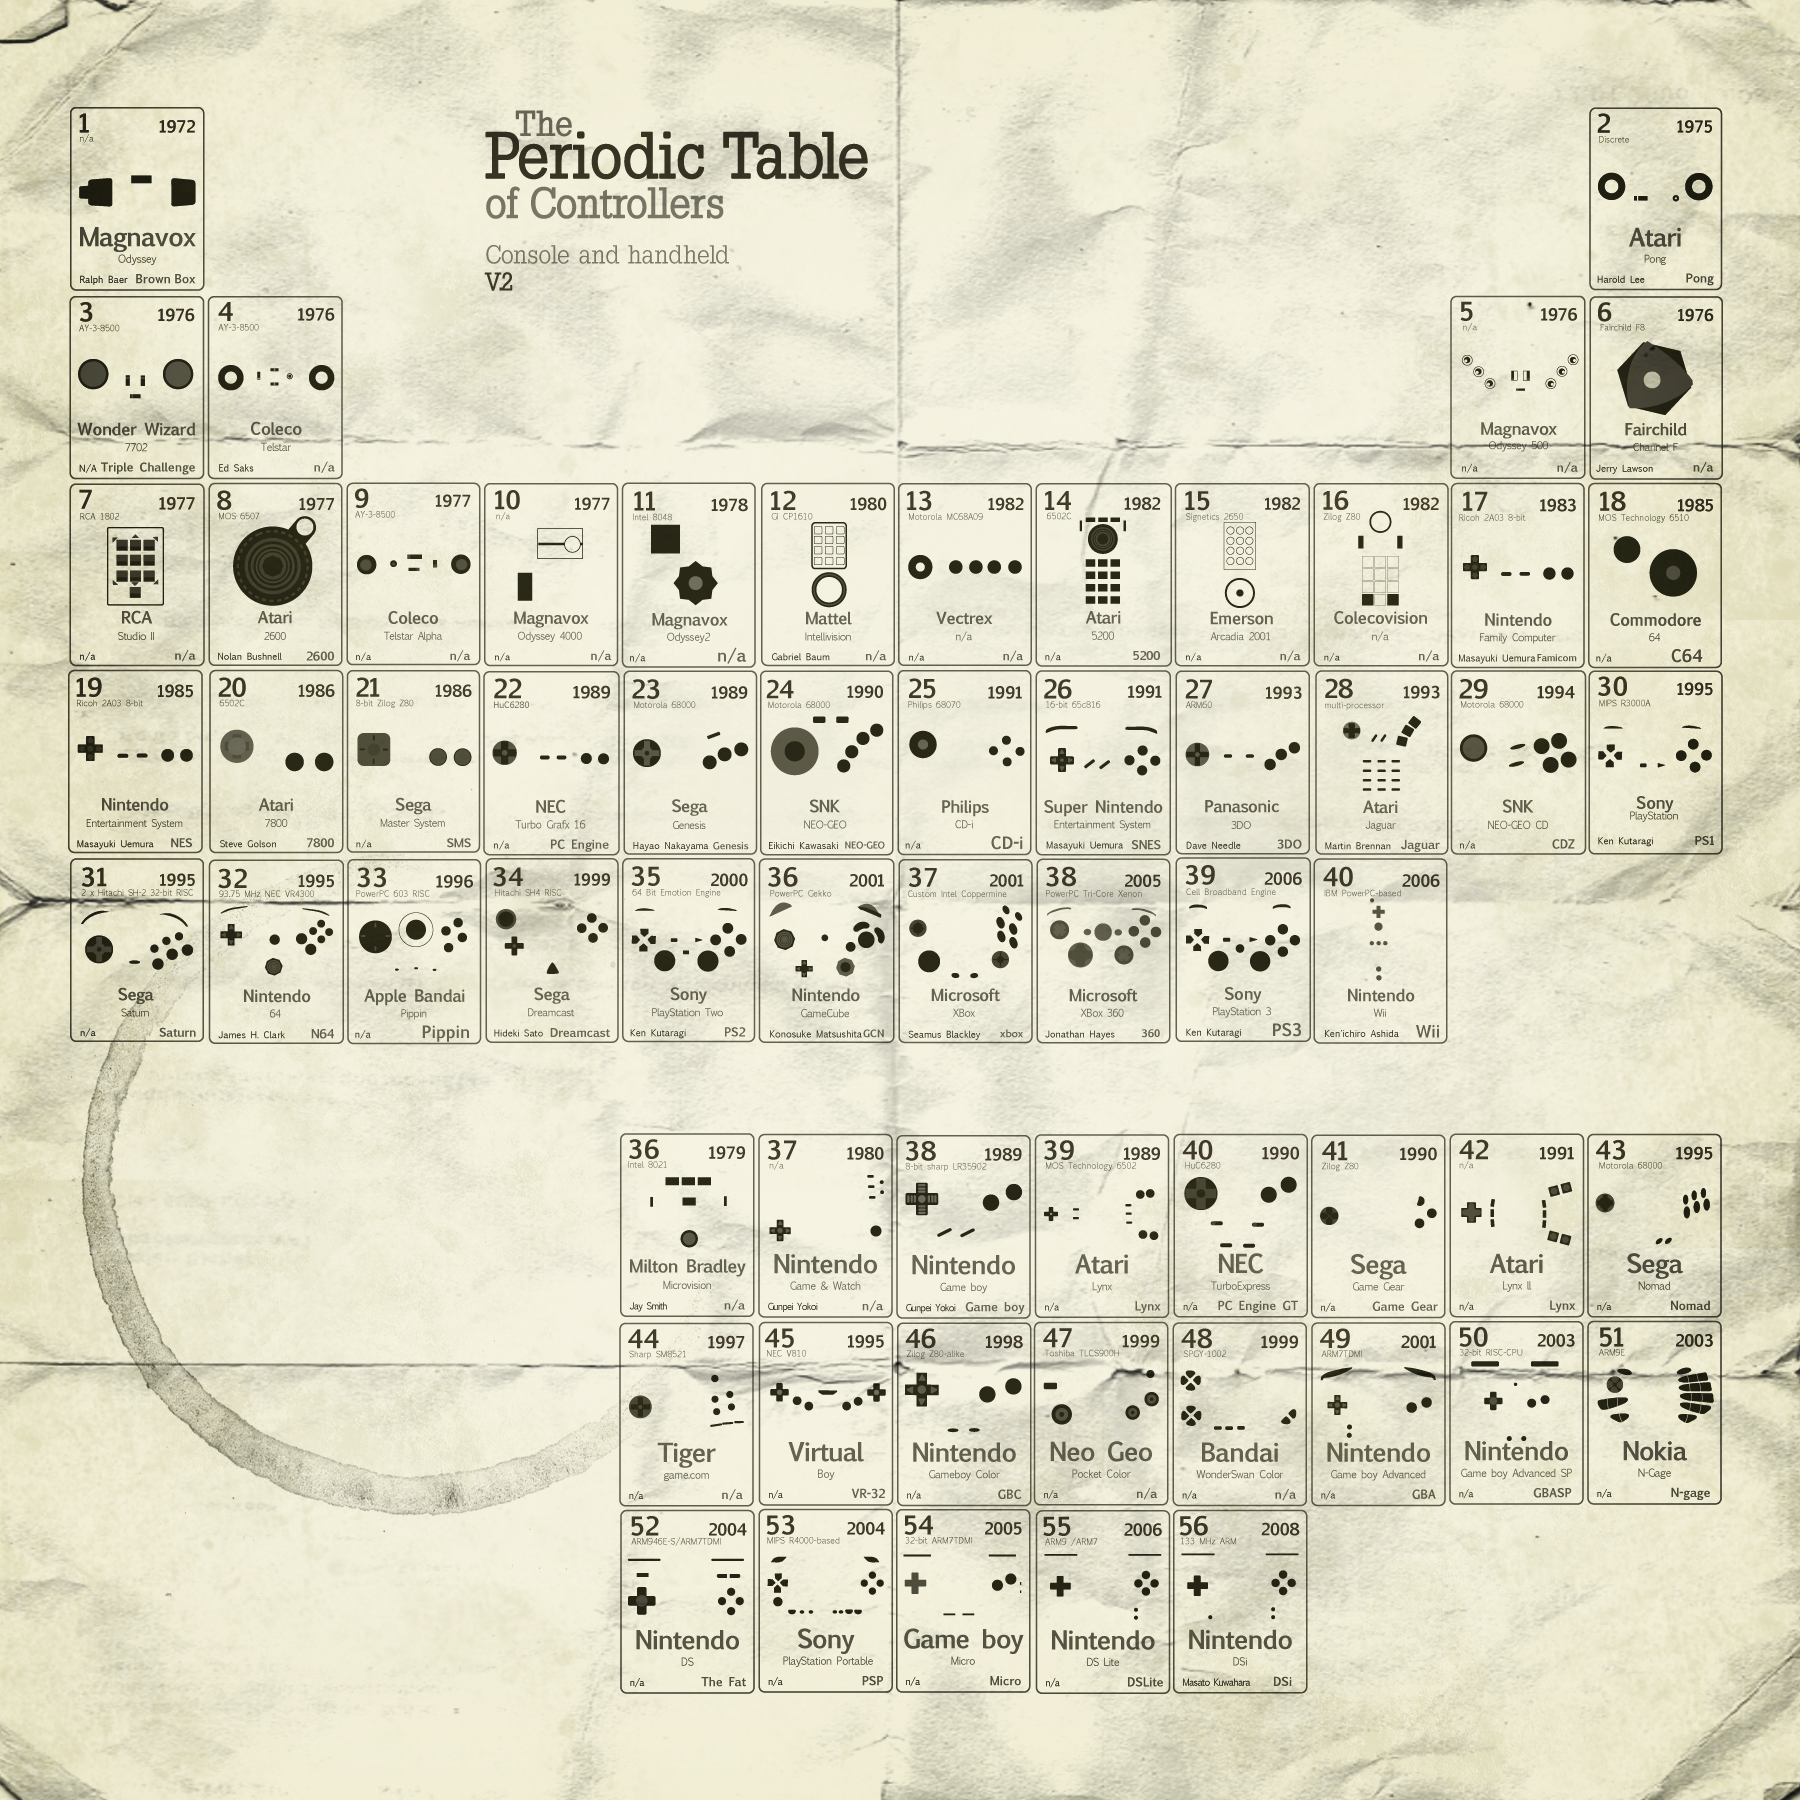 Periodic Table of Controllers